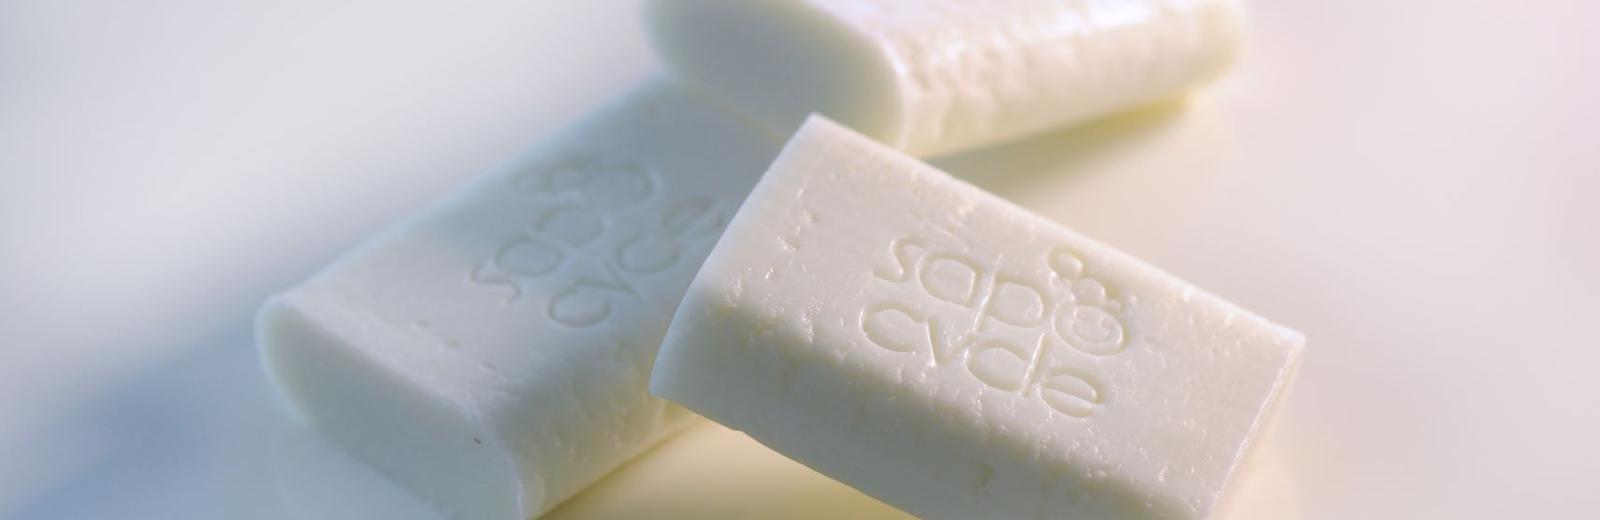 SapoCycle makes new bars of soap out of used hotel soaps. 